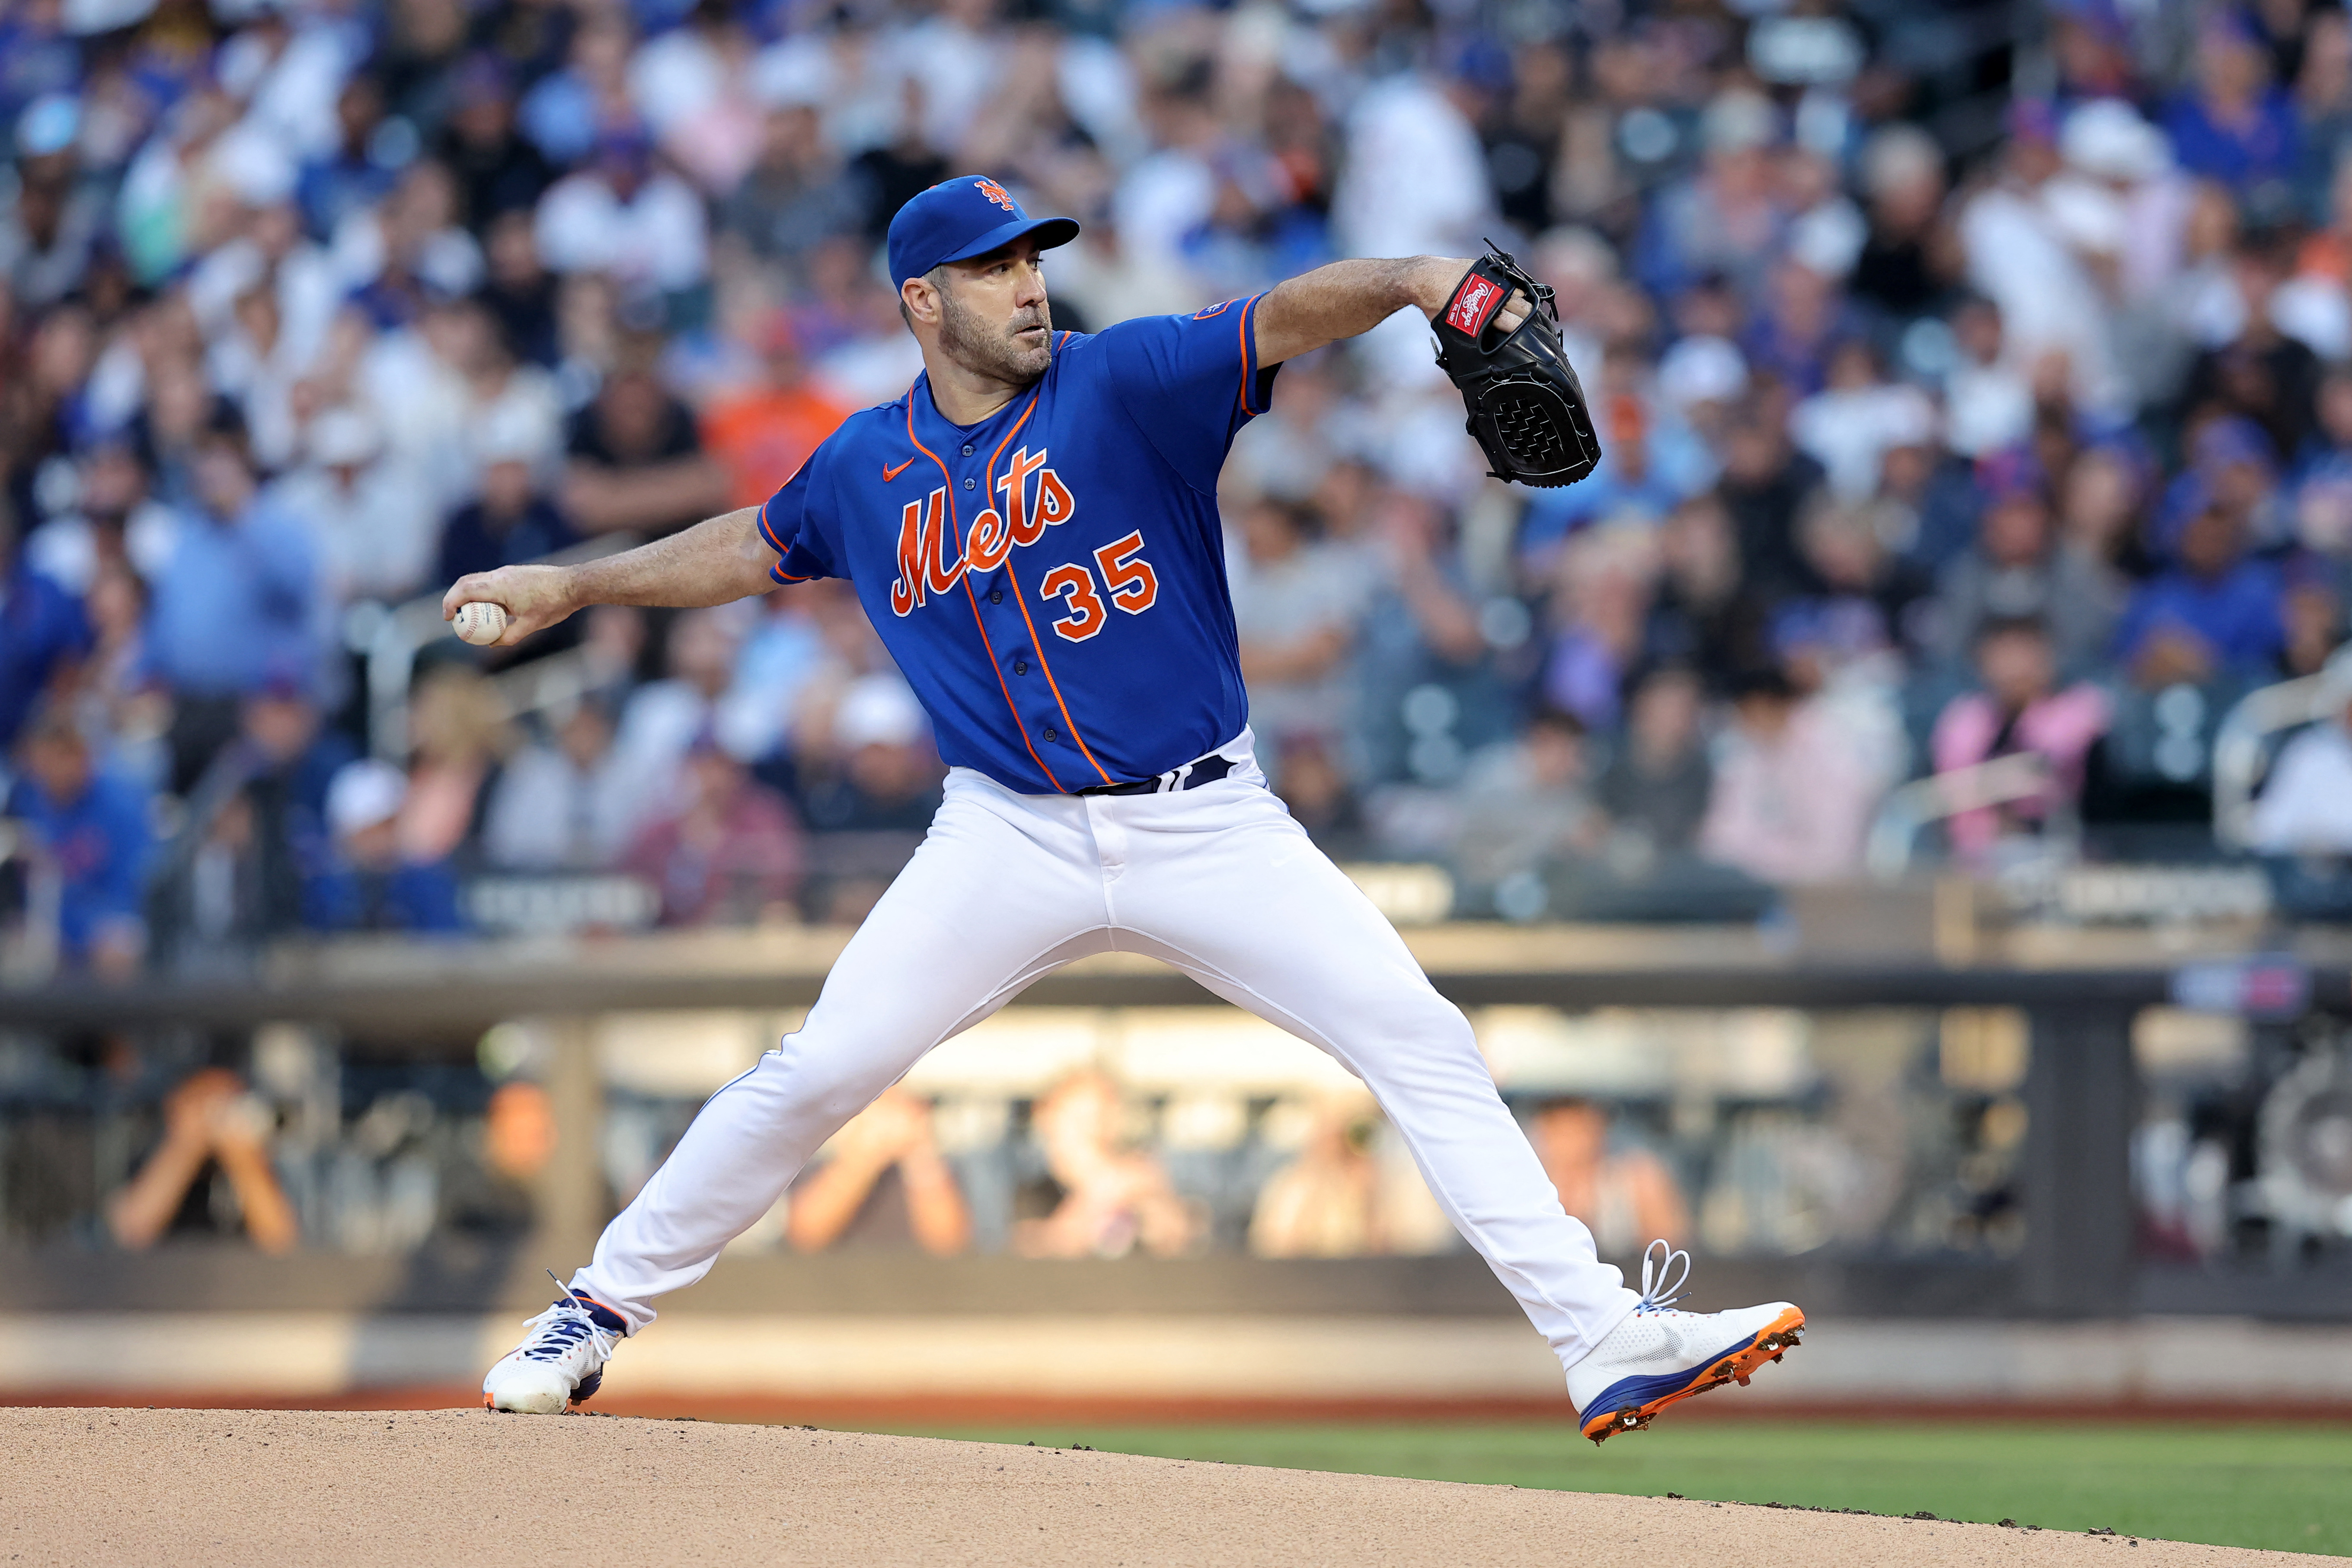 Mets show Yankees they also are New York baseball force